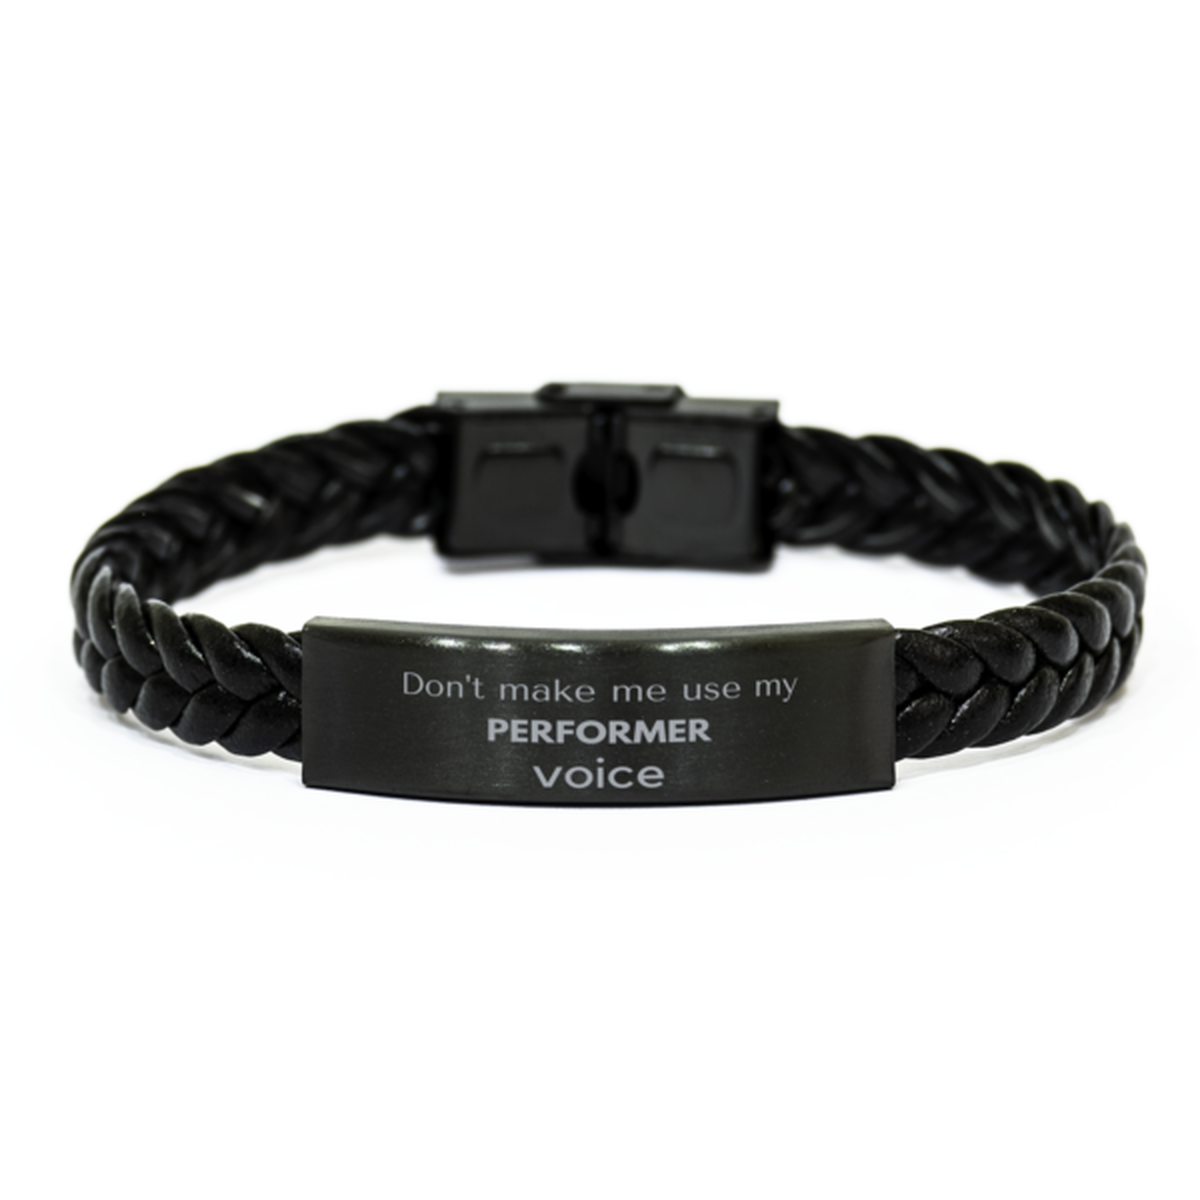 Don't make me use my Performer voice, Sarcasm Performer Gifts, Christmas Performer Braided Leather Bracelet Birthday Unique Gifts For Performer Coworkers, Men, Women, Colleague, Friends